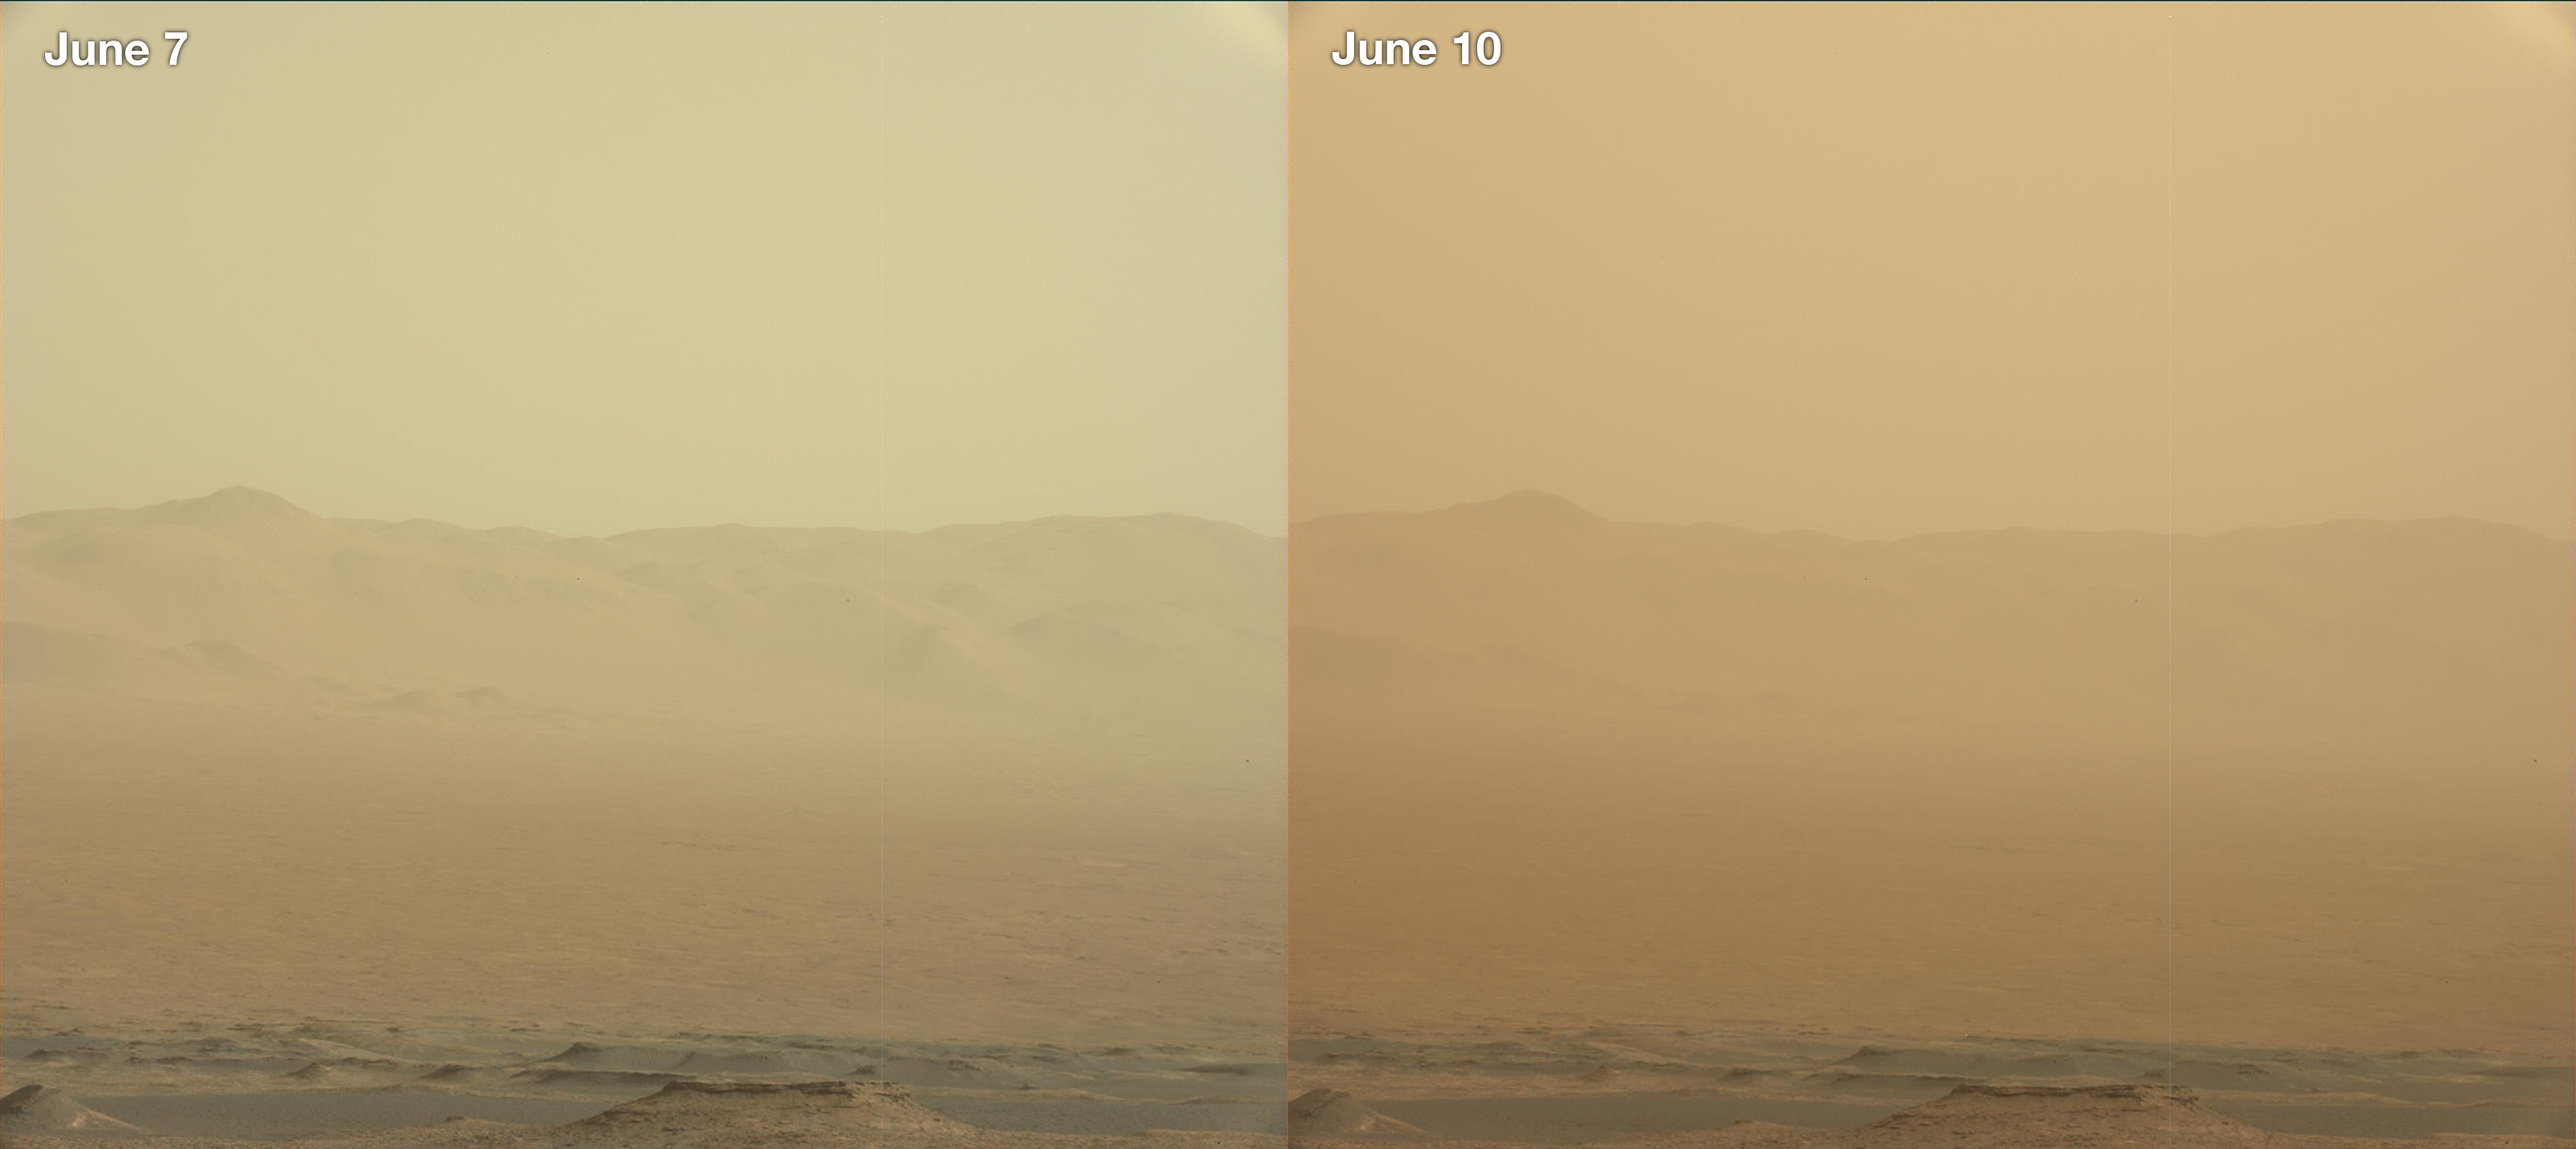 These two views from NASA’s Curiosity rover, acquired specifically to measure the amount of dust inside Gale Crater, show that dust has increased over three days from a major Martian dust storm.